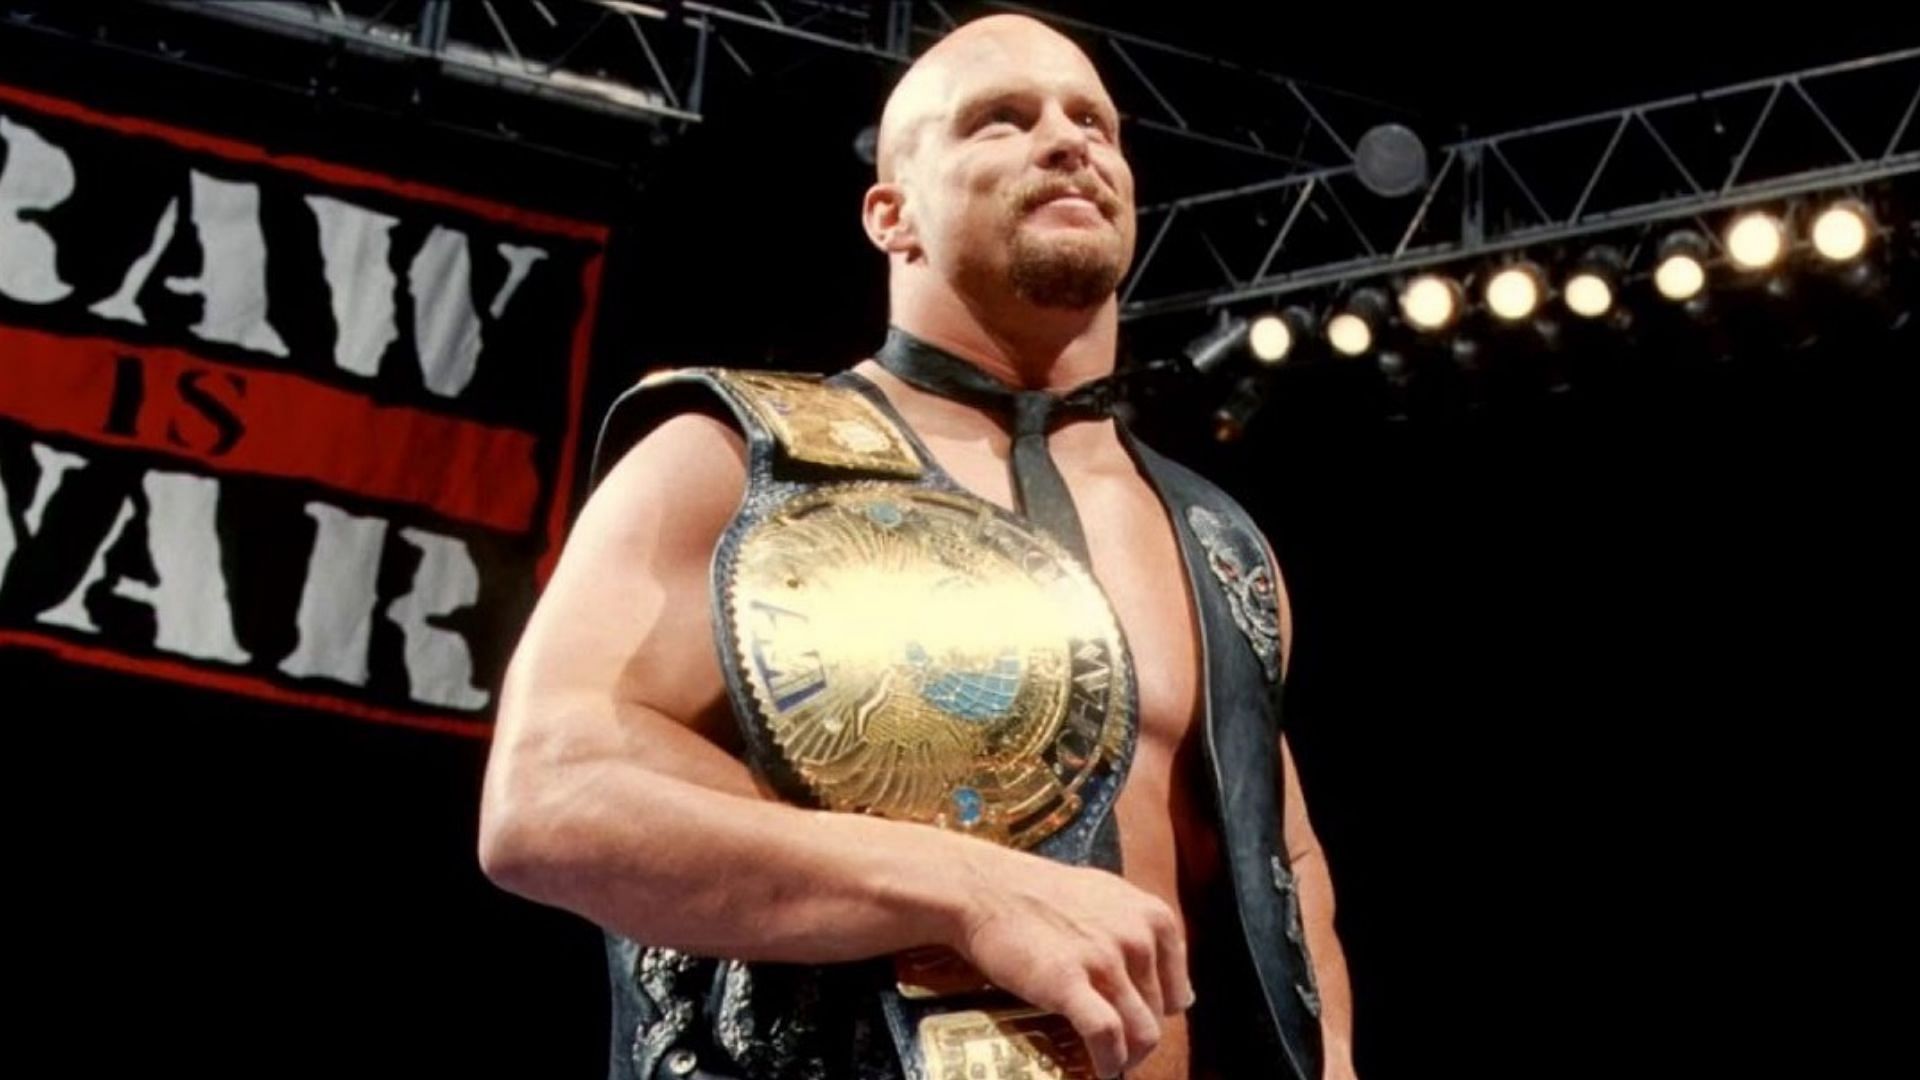 &#039;Stone Cold&#039; Steve Austin is one of the all-time greats